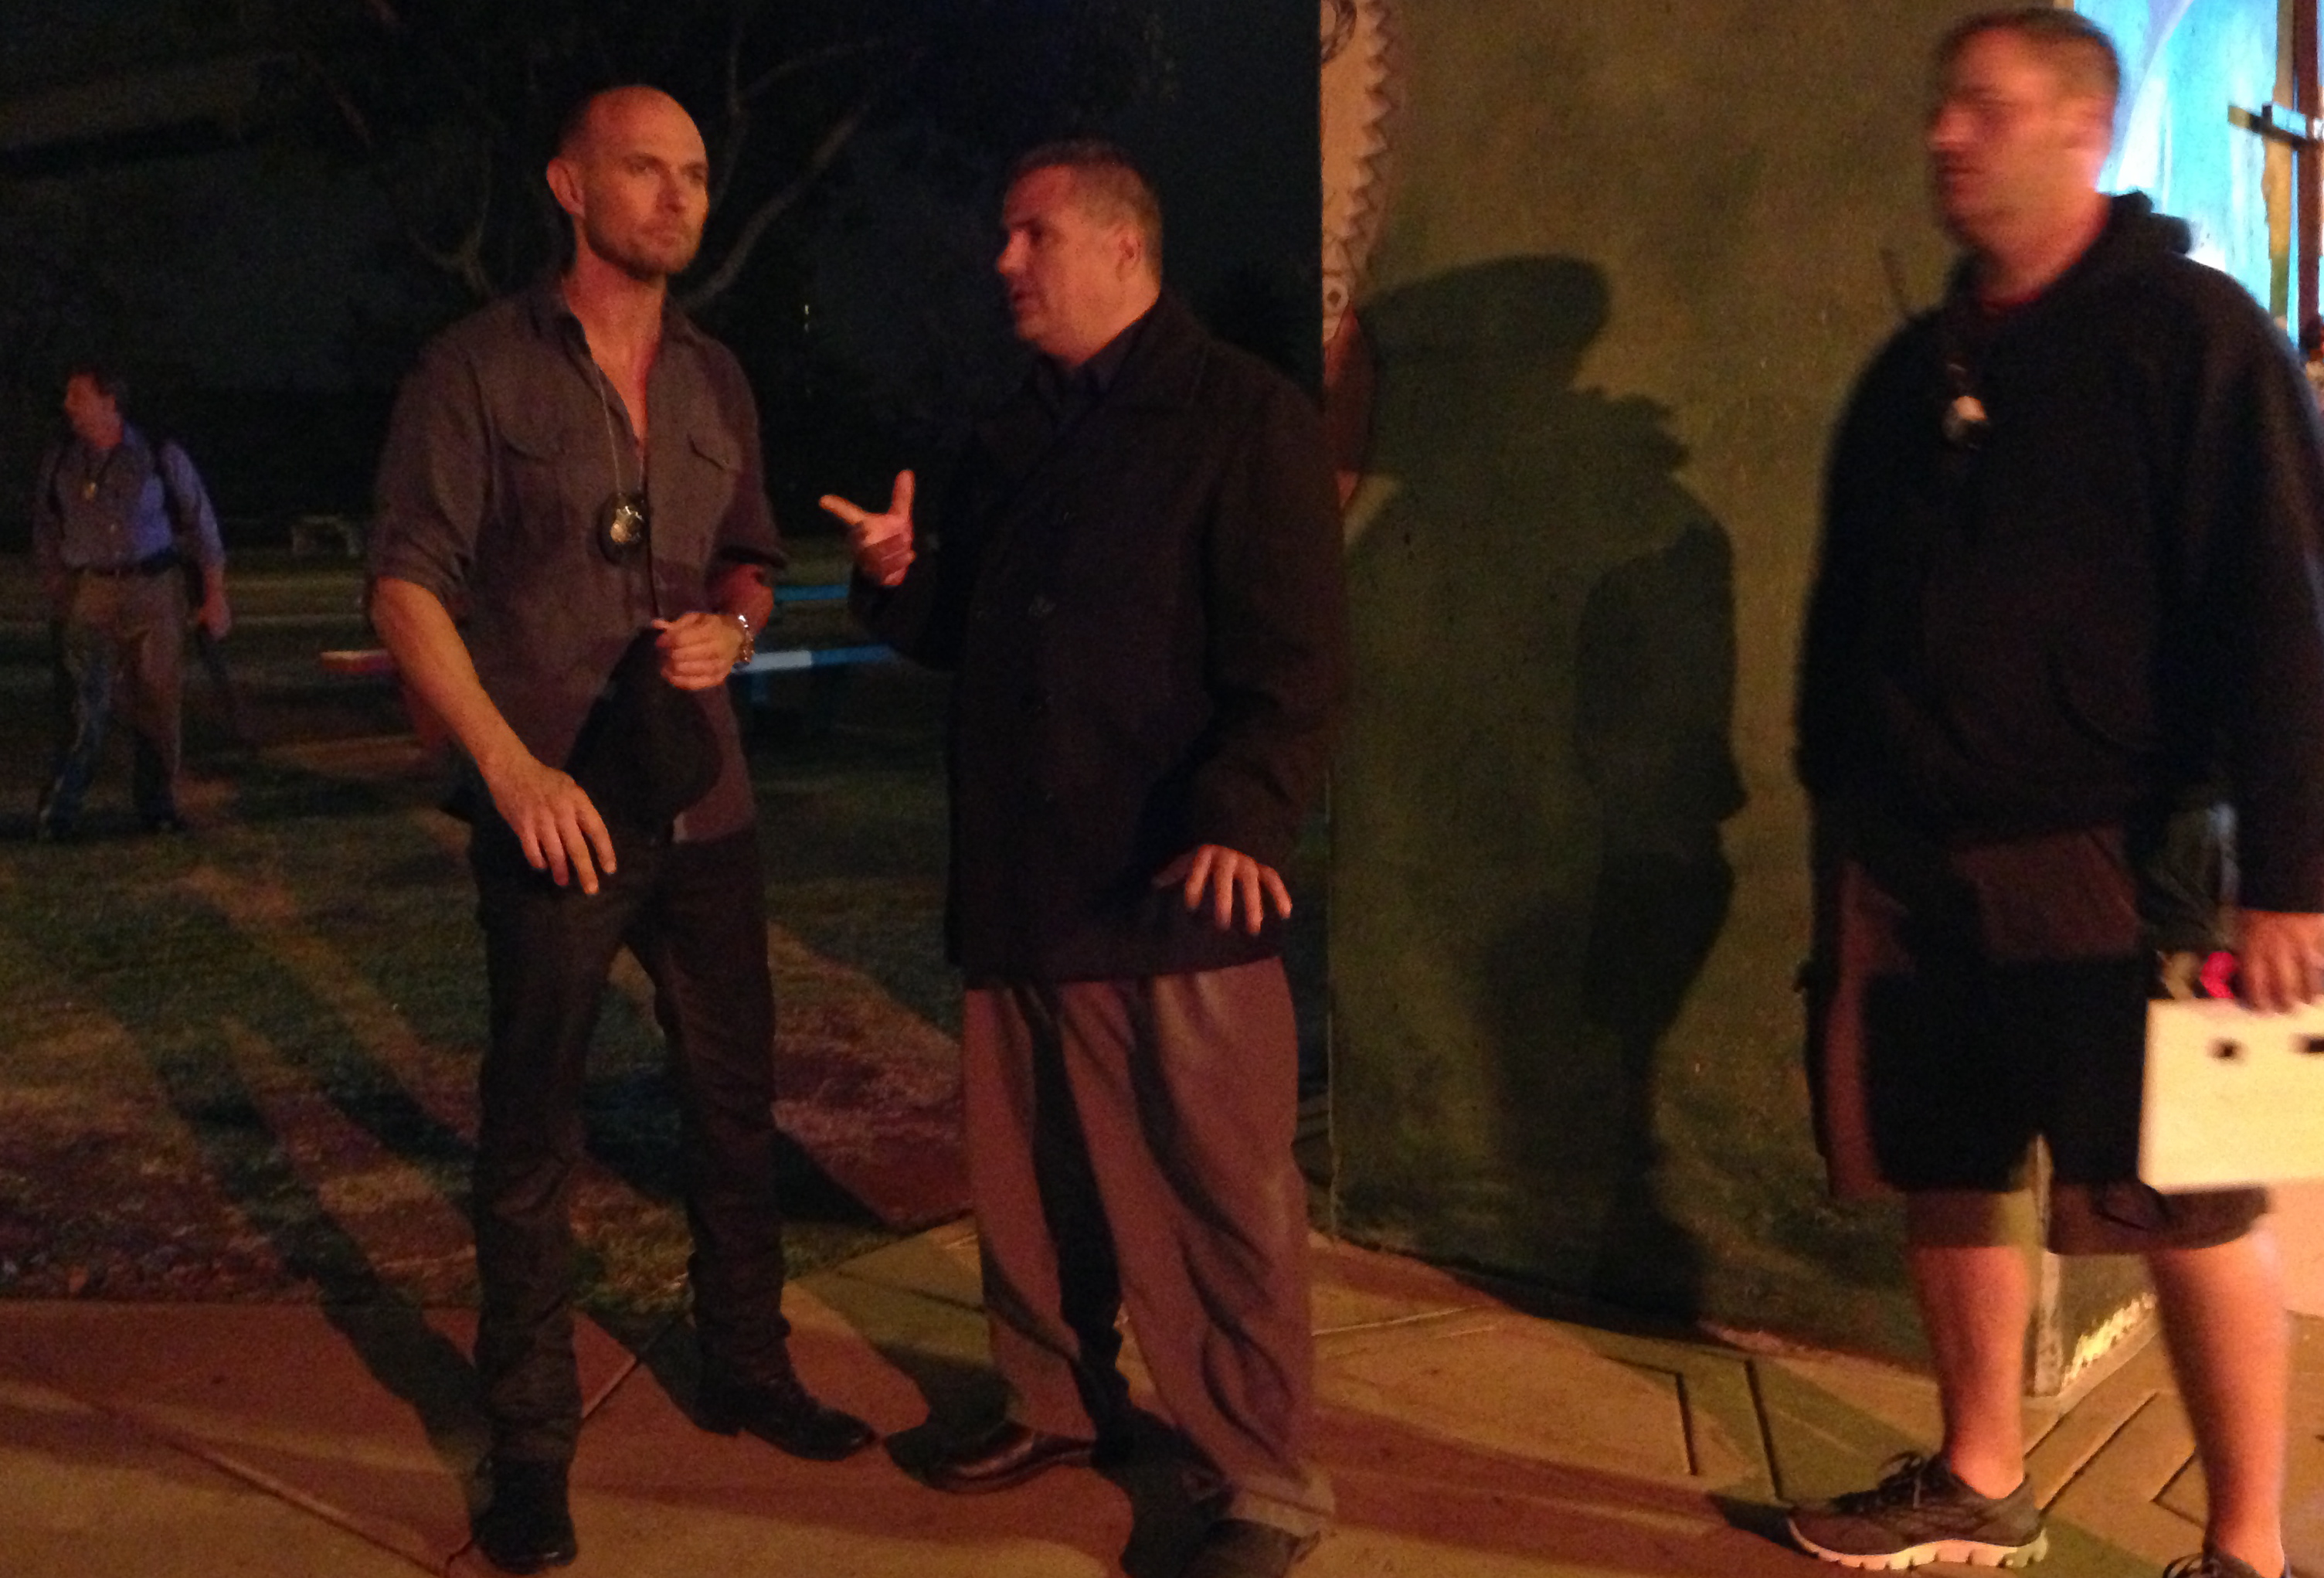 Daniel Zirilli (center) directing LUC GOSS, with A.D. Evan L. Robichaud on set of ROADRUN, shooting at Chicano Park (San Diego, 2013)